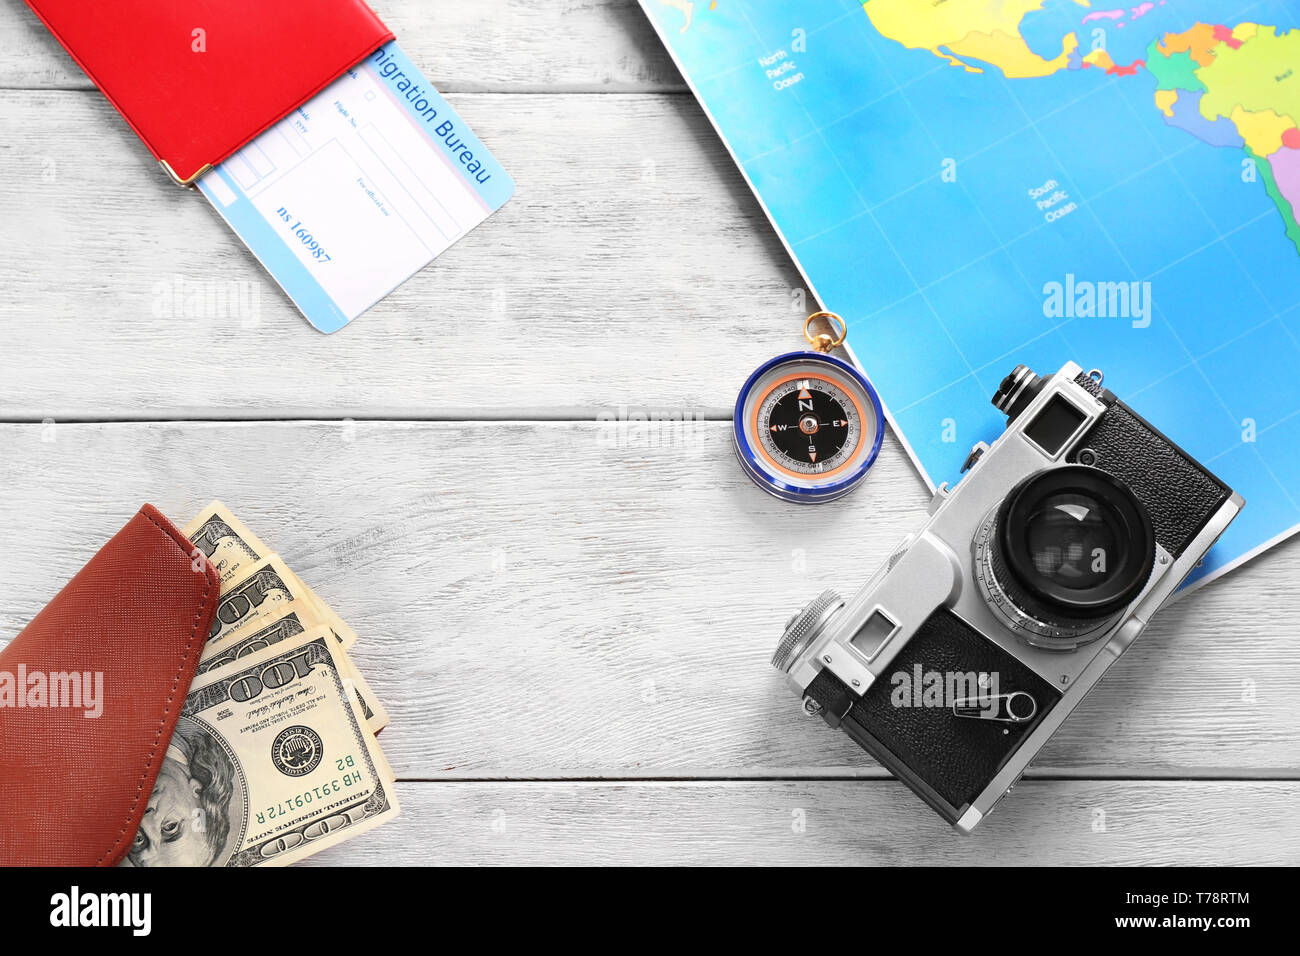 Composition with map, camera,money and passport on wooden background. Travel concept Stock Photo